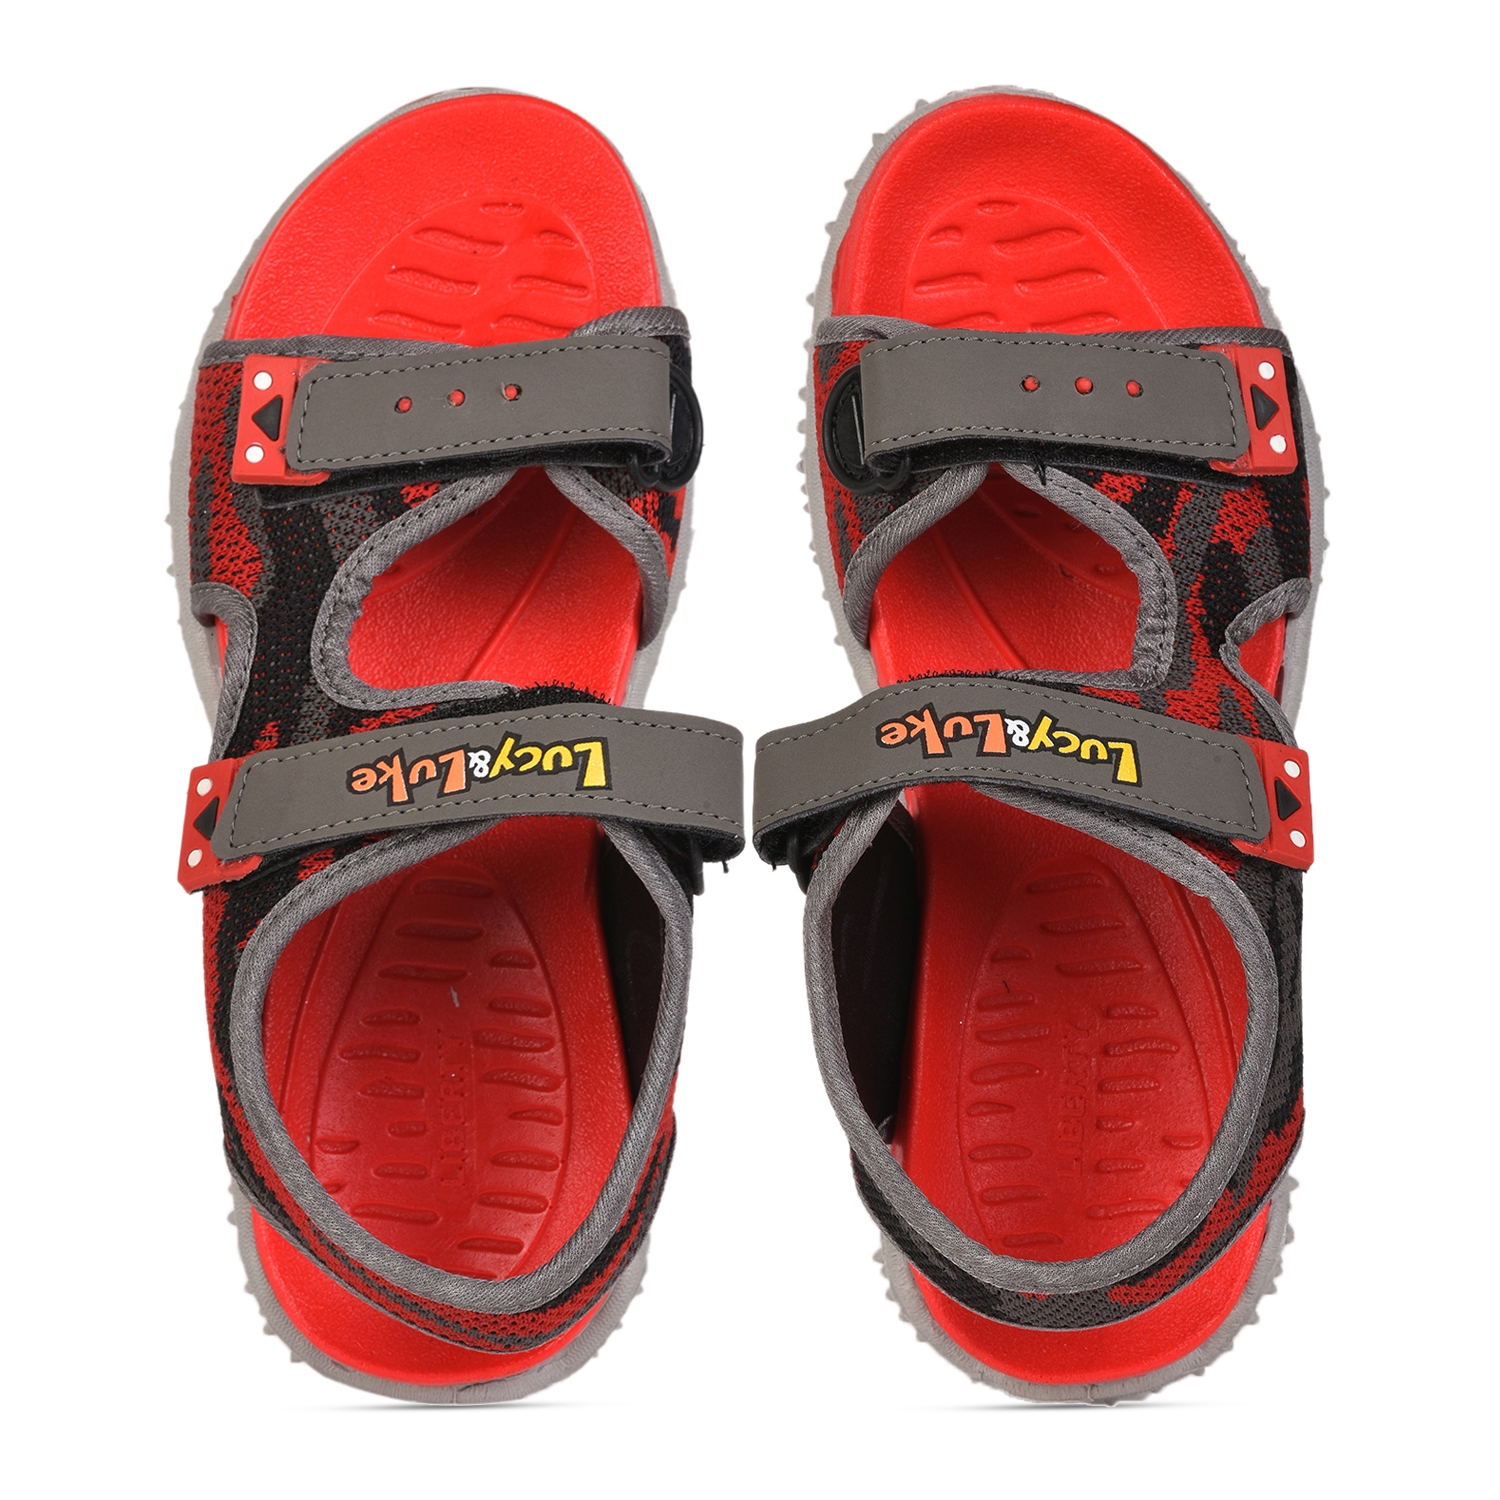 Lucy & Luke by Liberty RICO-17 Red Sandals for Kids